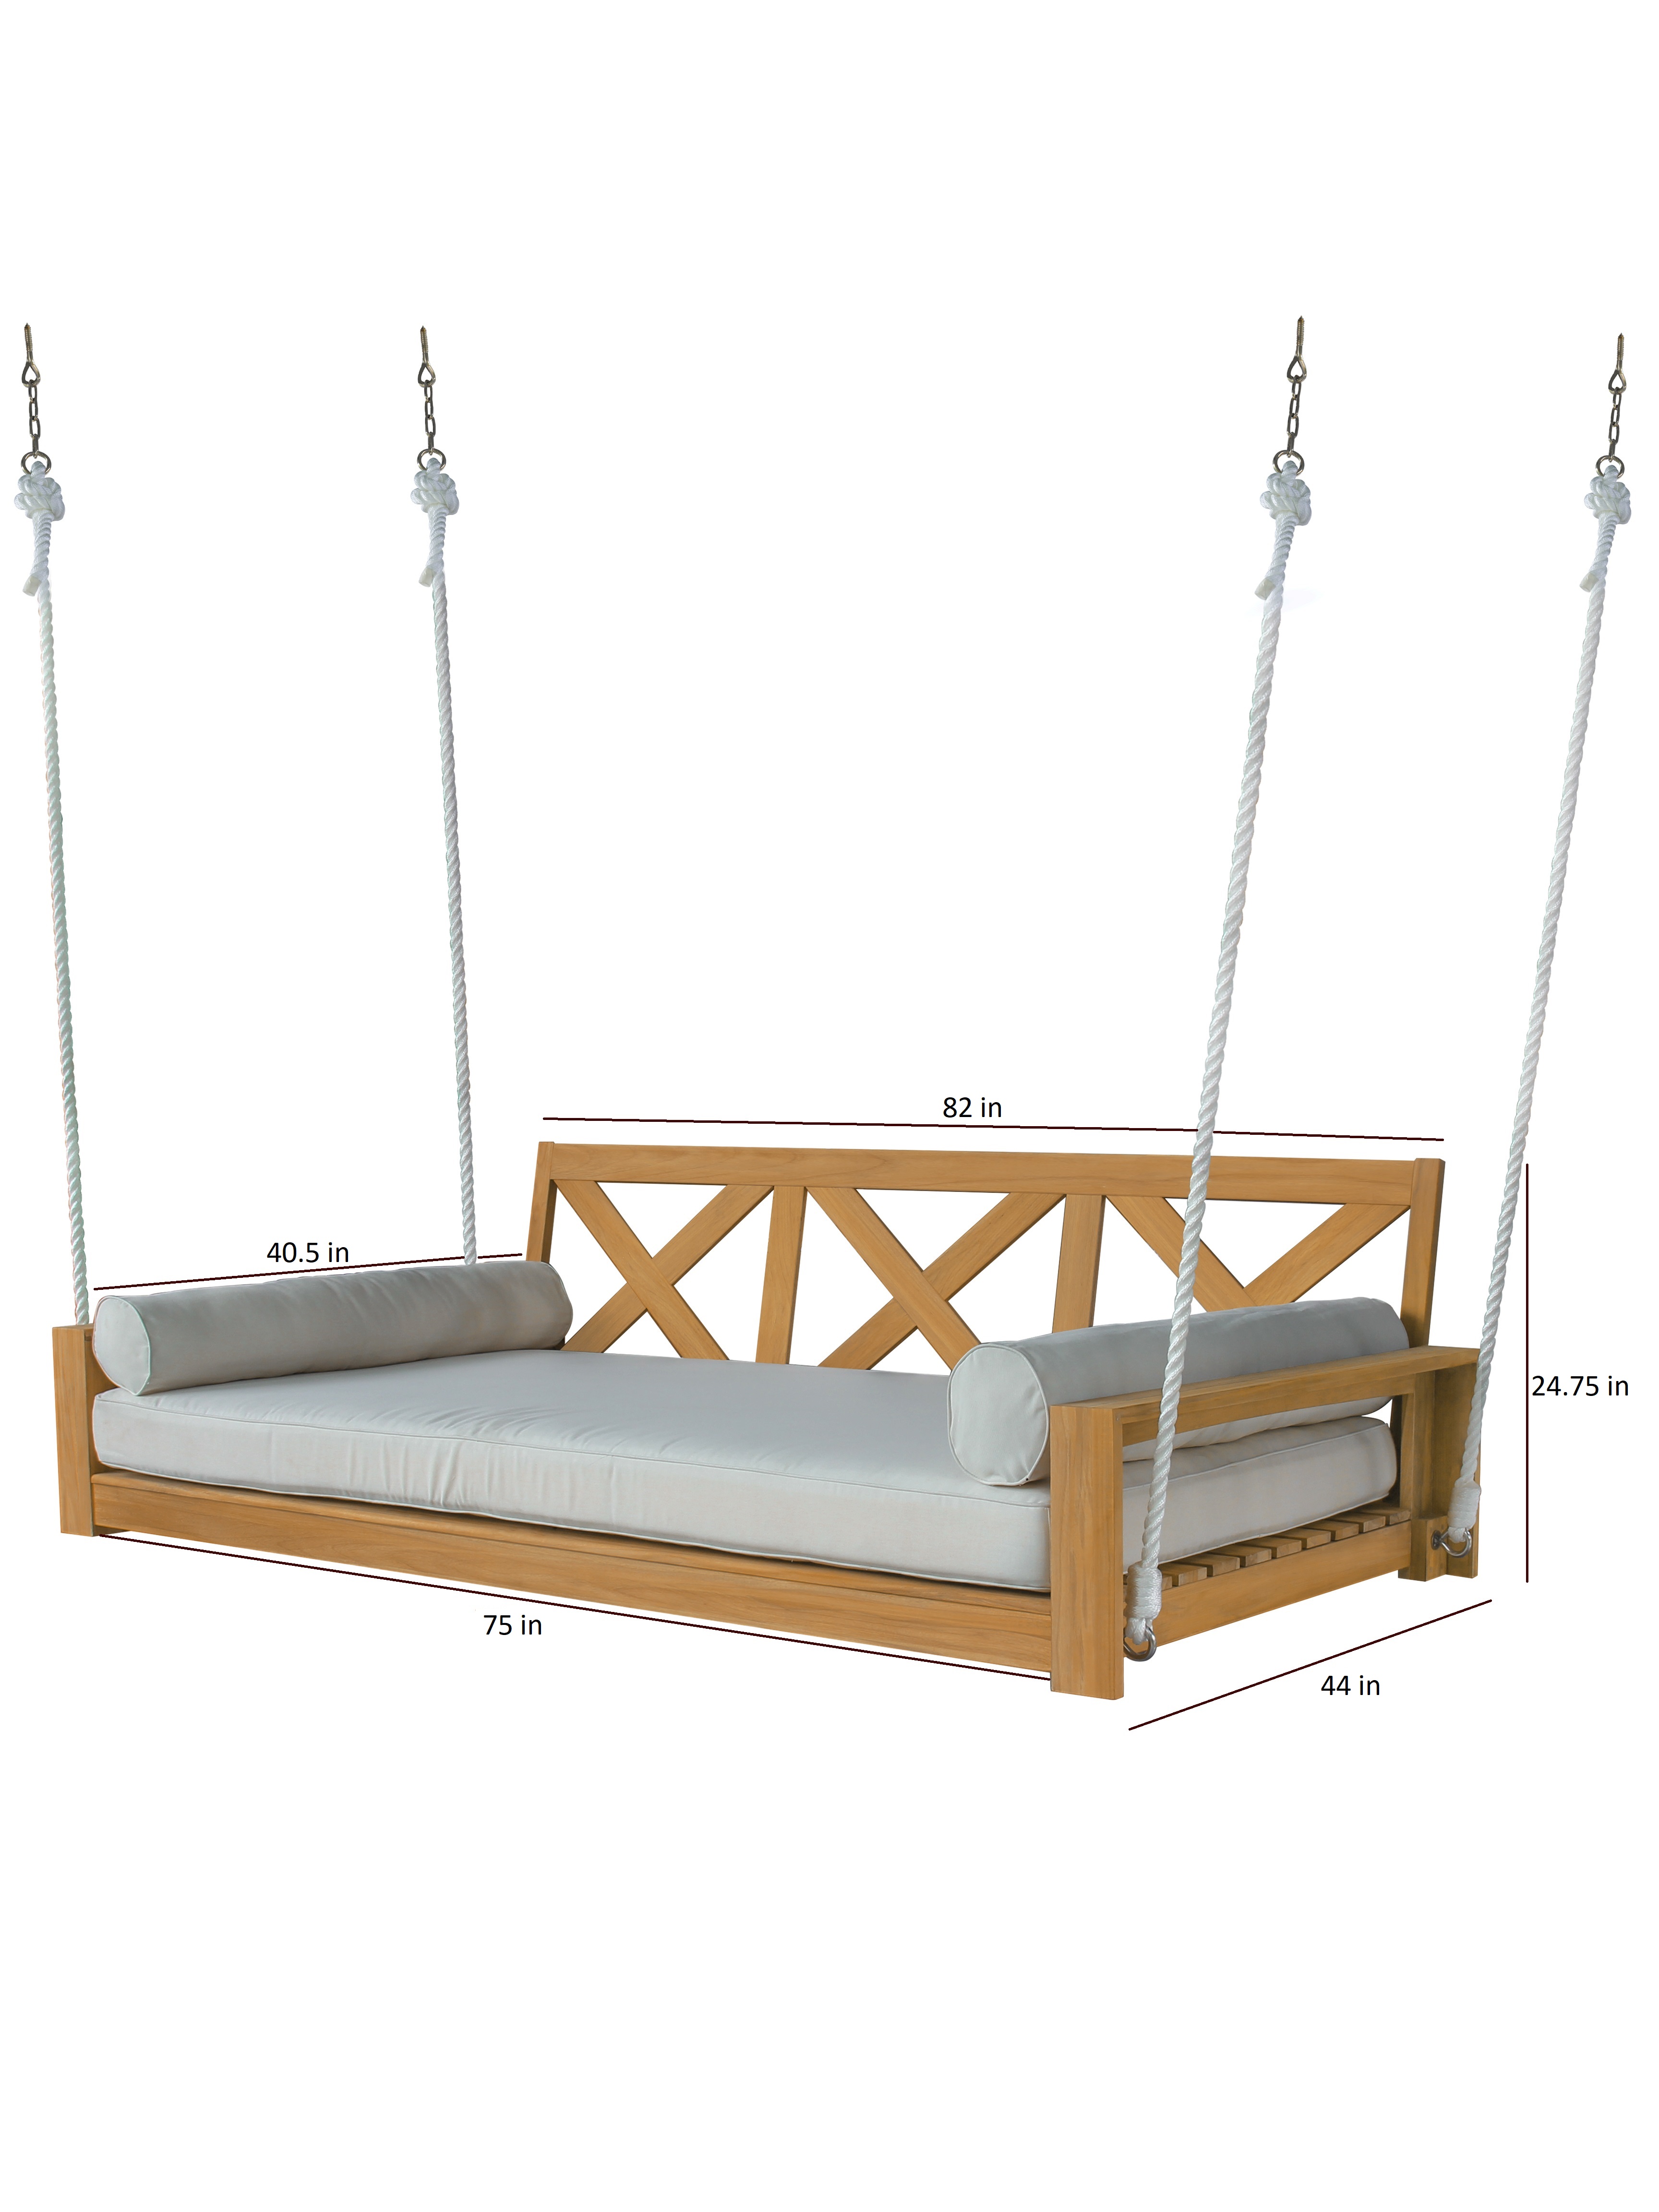 Better Homes & Gardens Ashbrook 3-Persons Teak Porch Swing with Cushions by Dave & Jenny Marrs - image 10 of 10